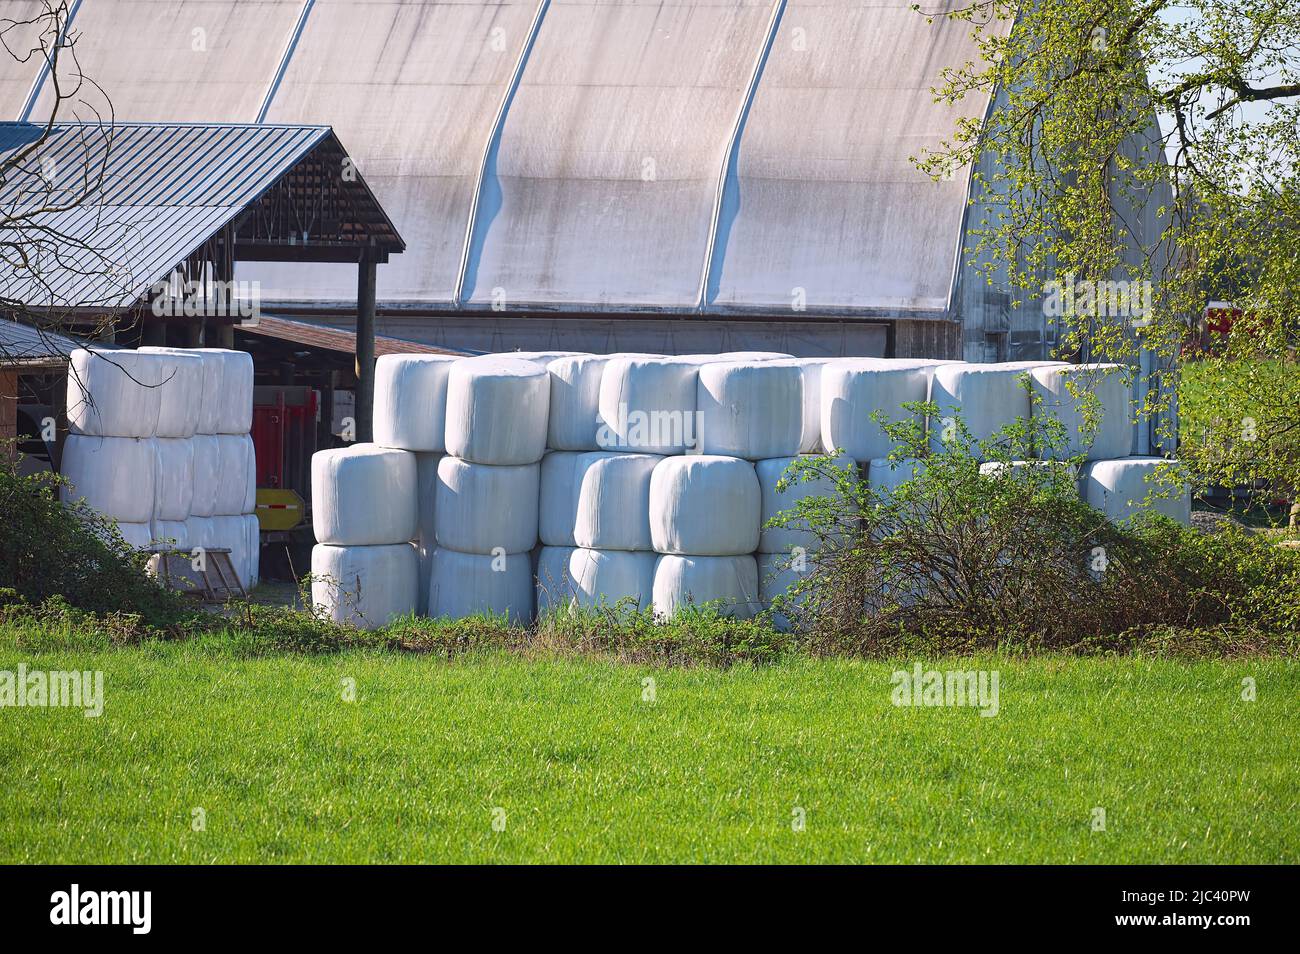 Plastic-wrapped bales of hay stacked beside a barn. Stock Photo